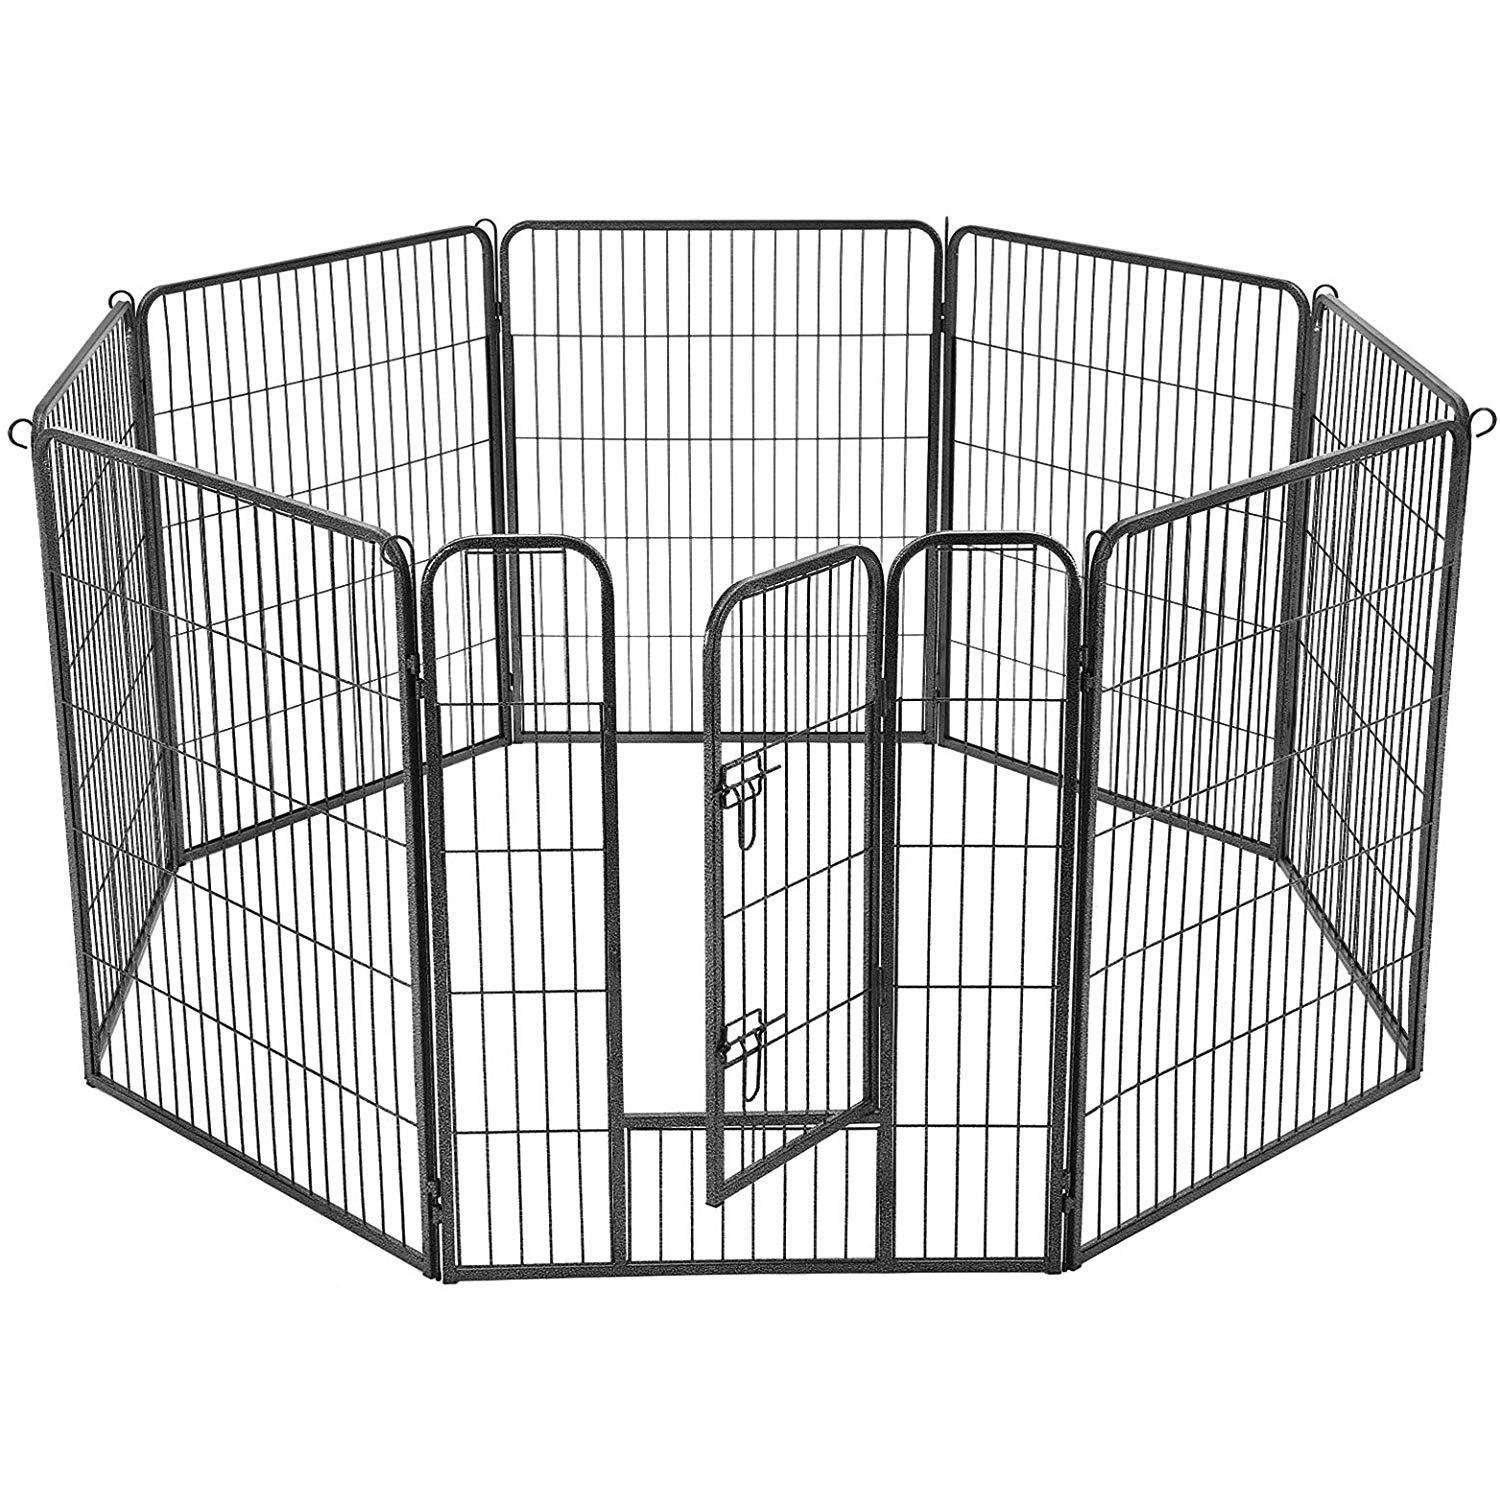 Nancy's Dog Crate - Dog Crate - Dog Kennel - Pet Playpen - Dog Daycare for Dogs - 77 x 100 cm